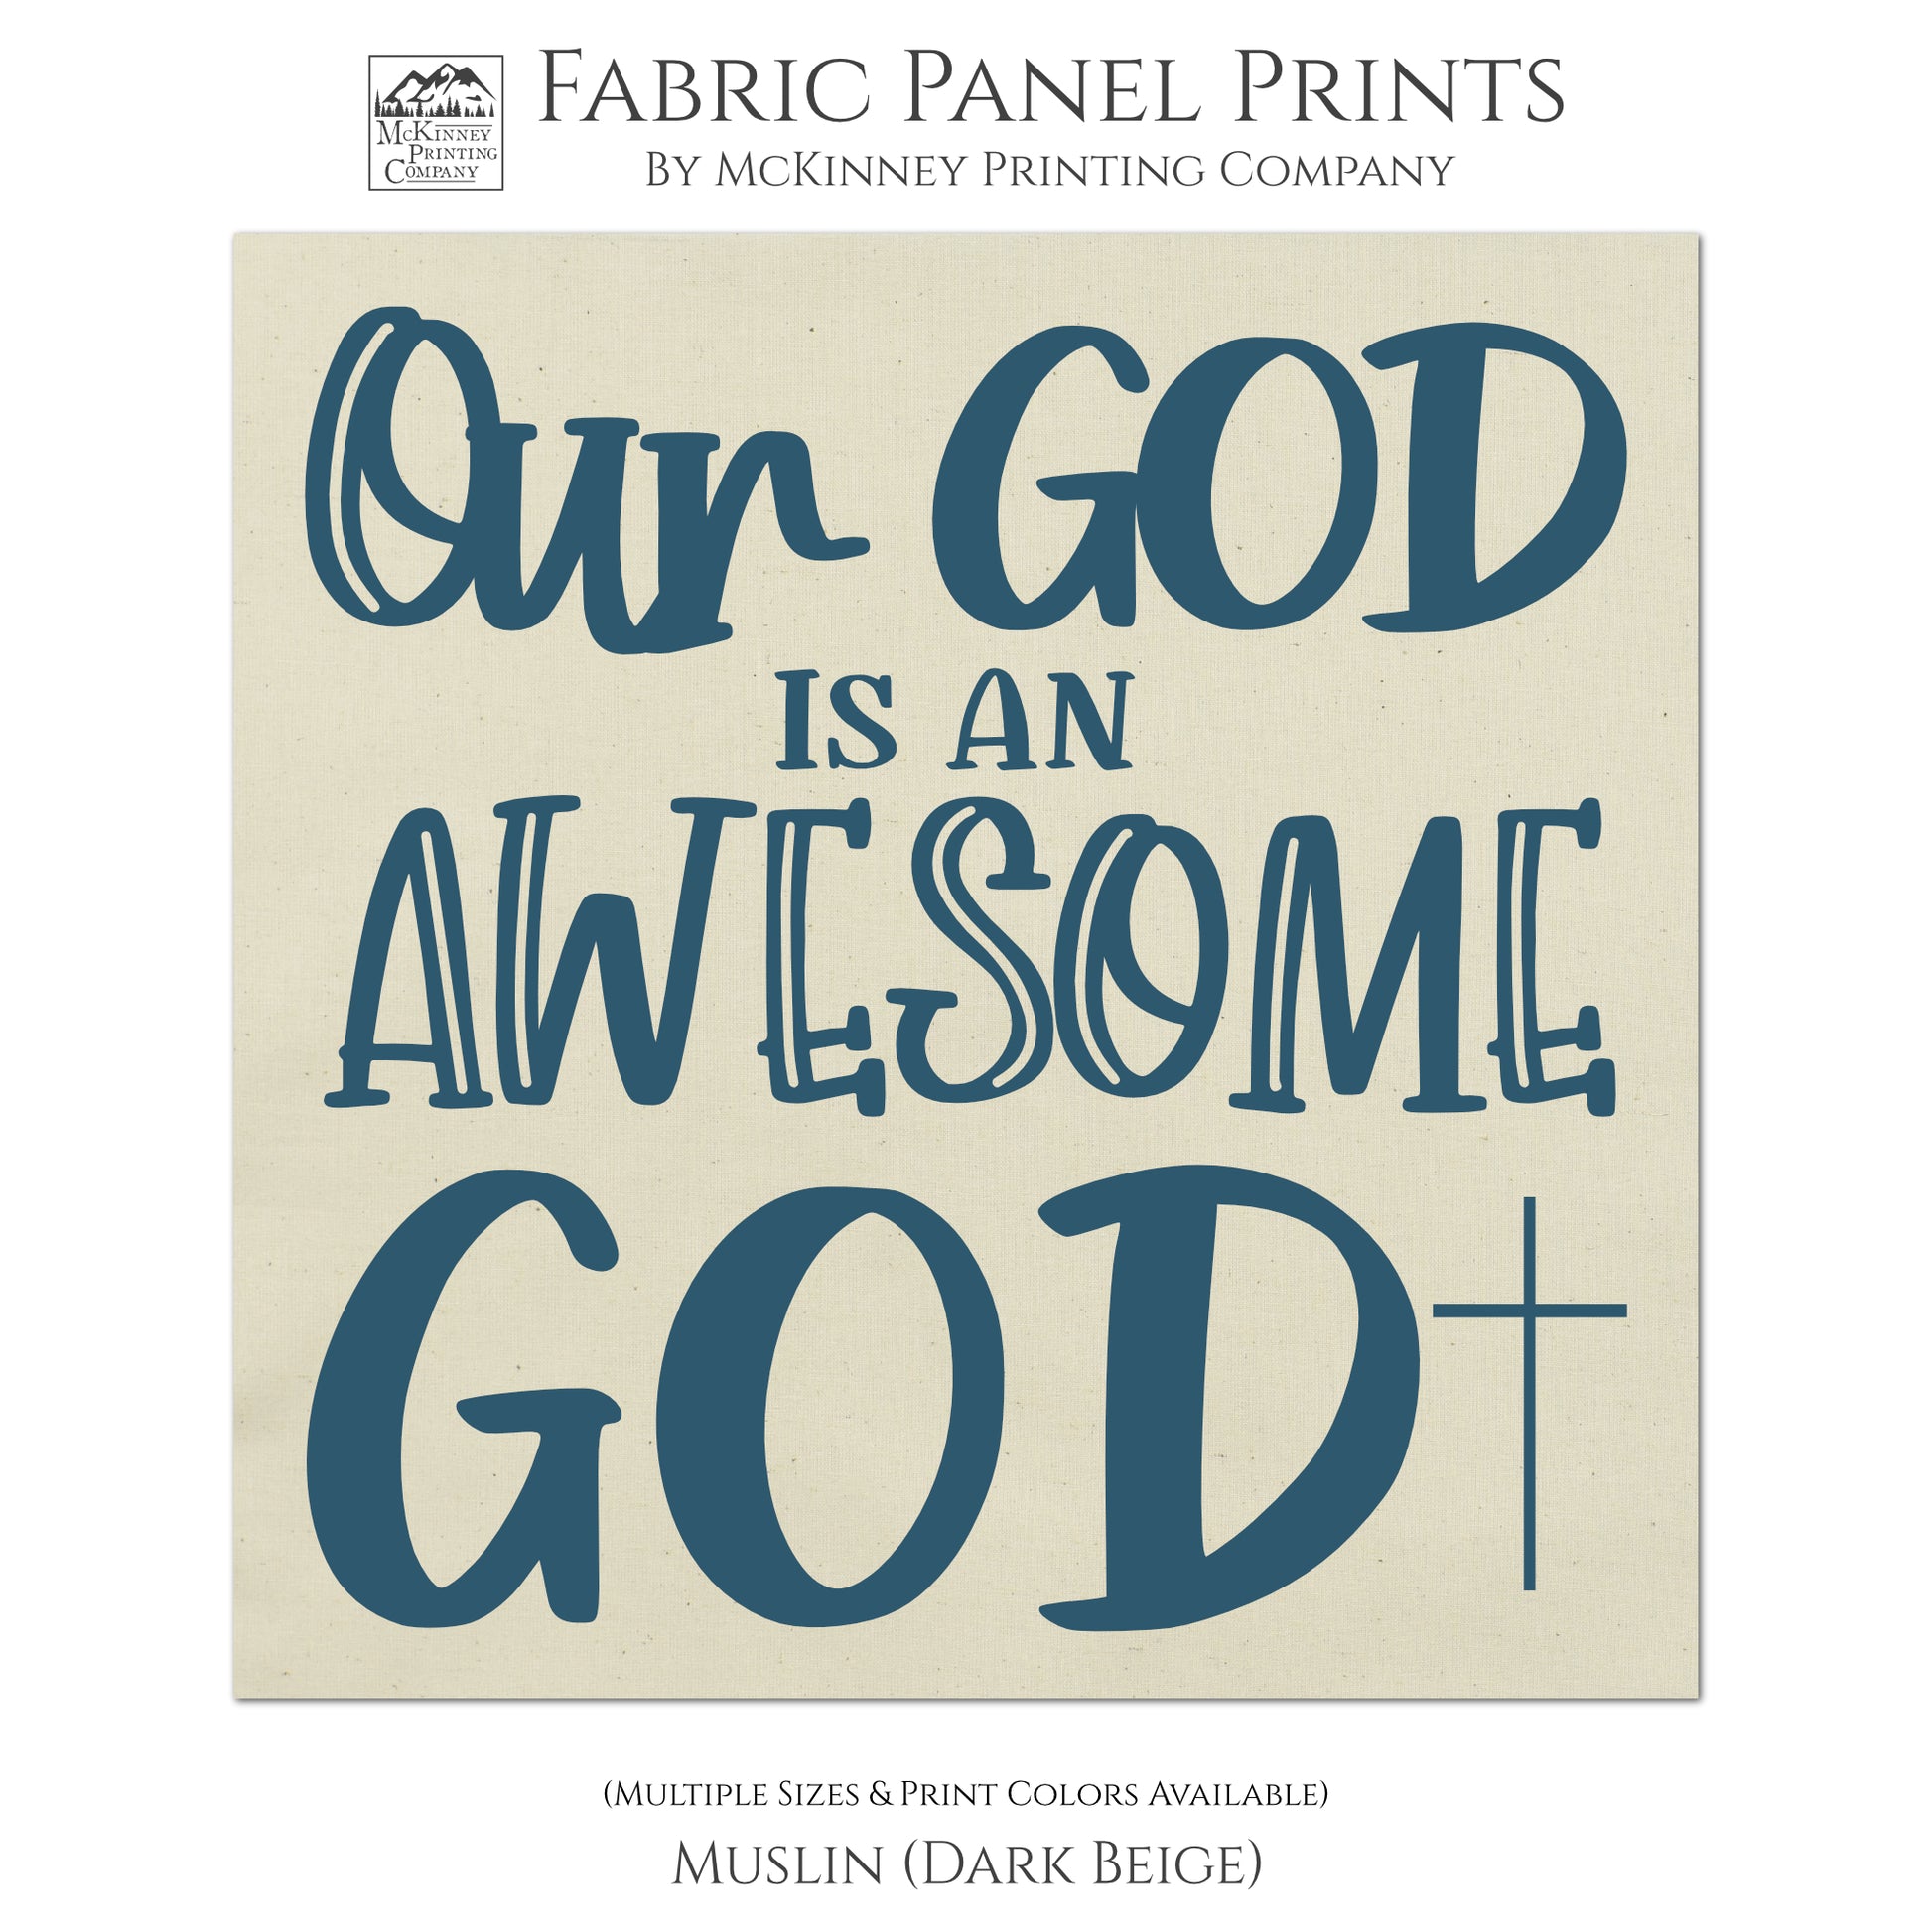 Our God Is An Awesome God - Fabric Panel Print, Wall Art, Christian Fabric, Quilt Block - Muslin